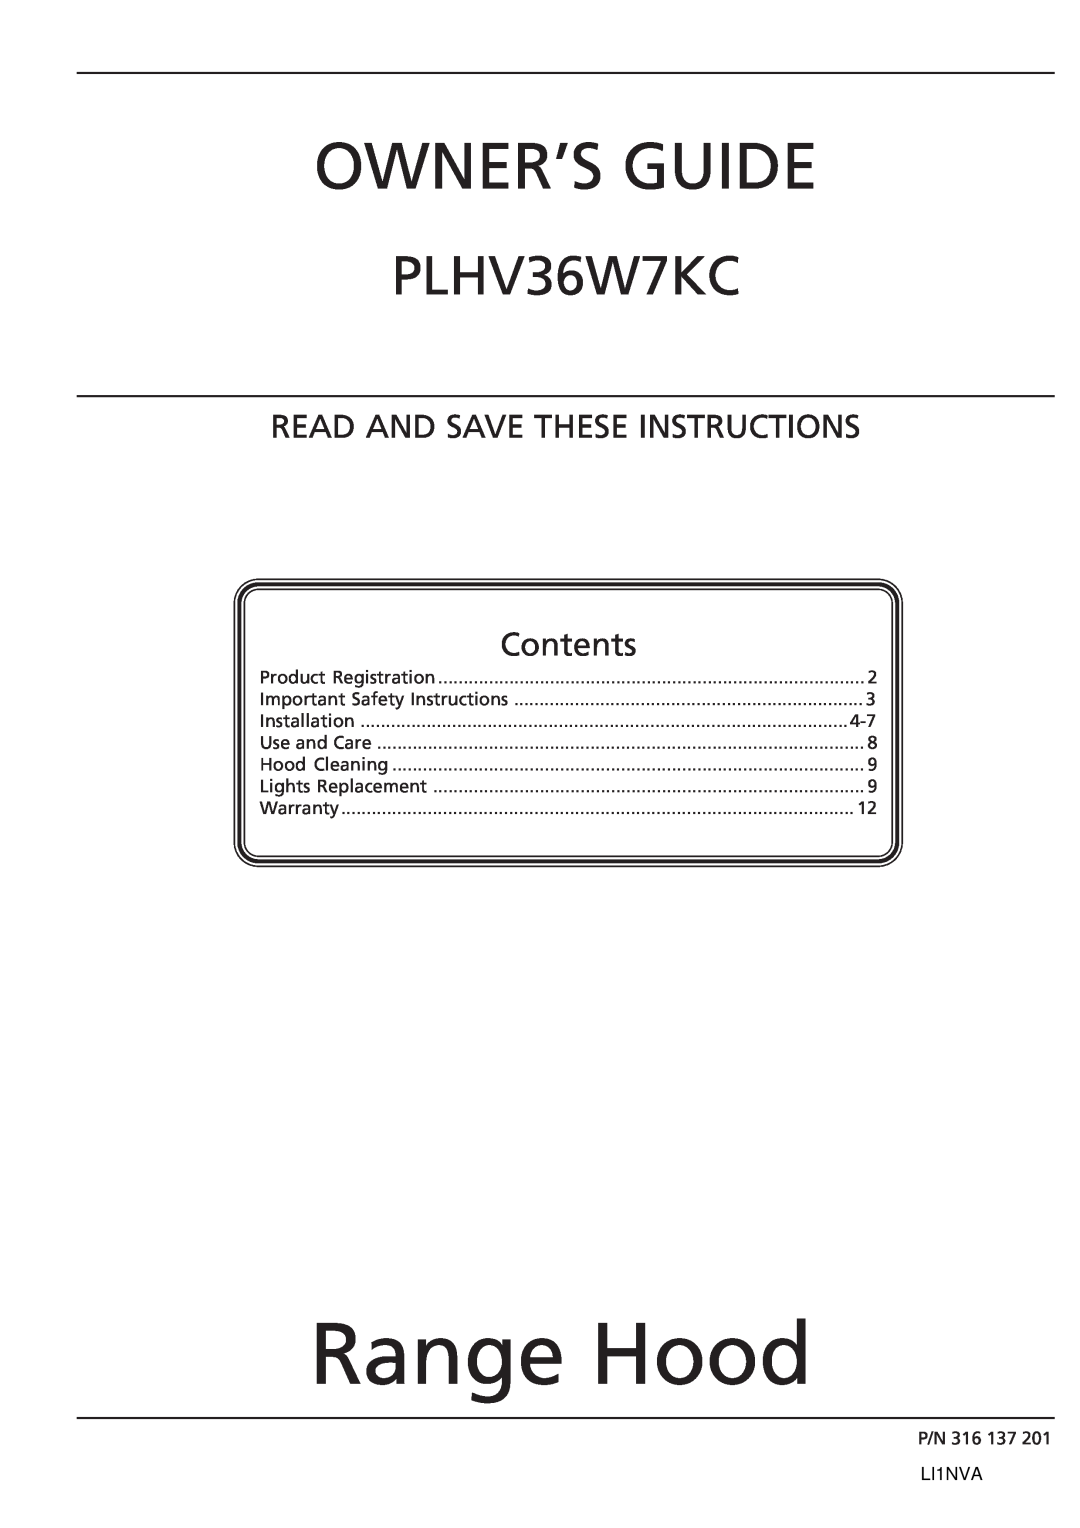 Frigidaire PLHV36W7KC important safety instructions Range Hood, Owner’S Guide, Read And Save These Instructions, Contents 